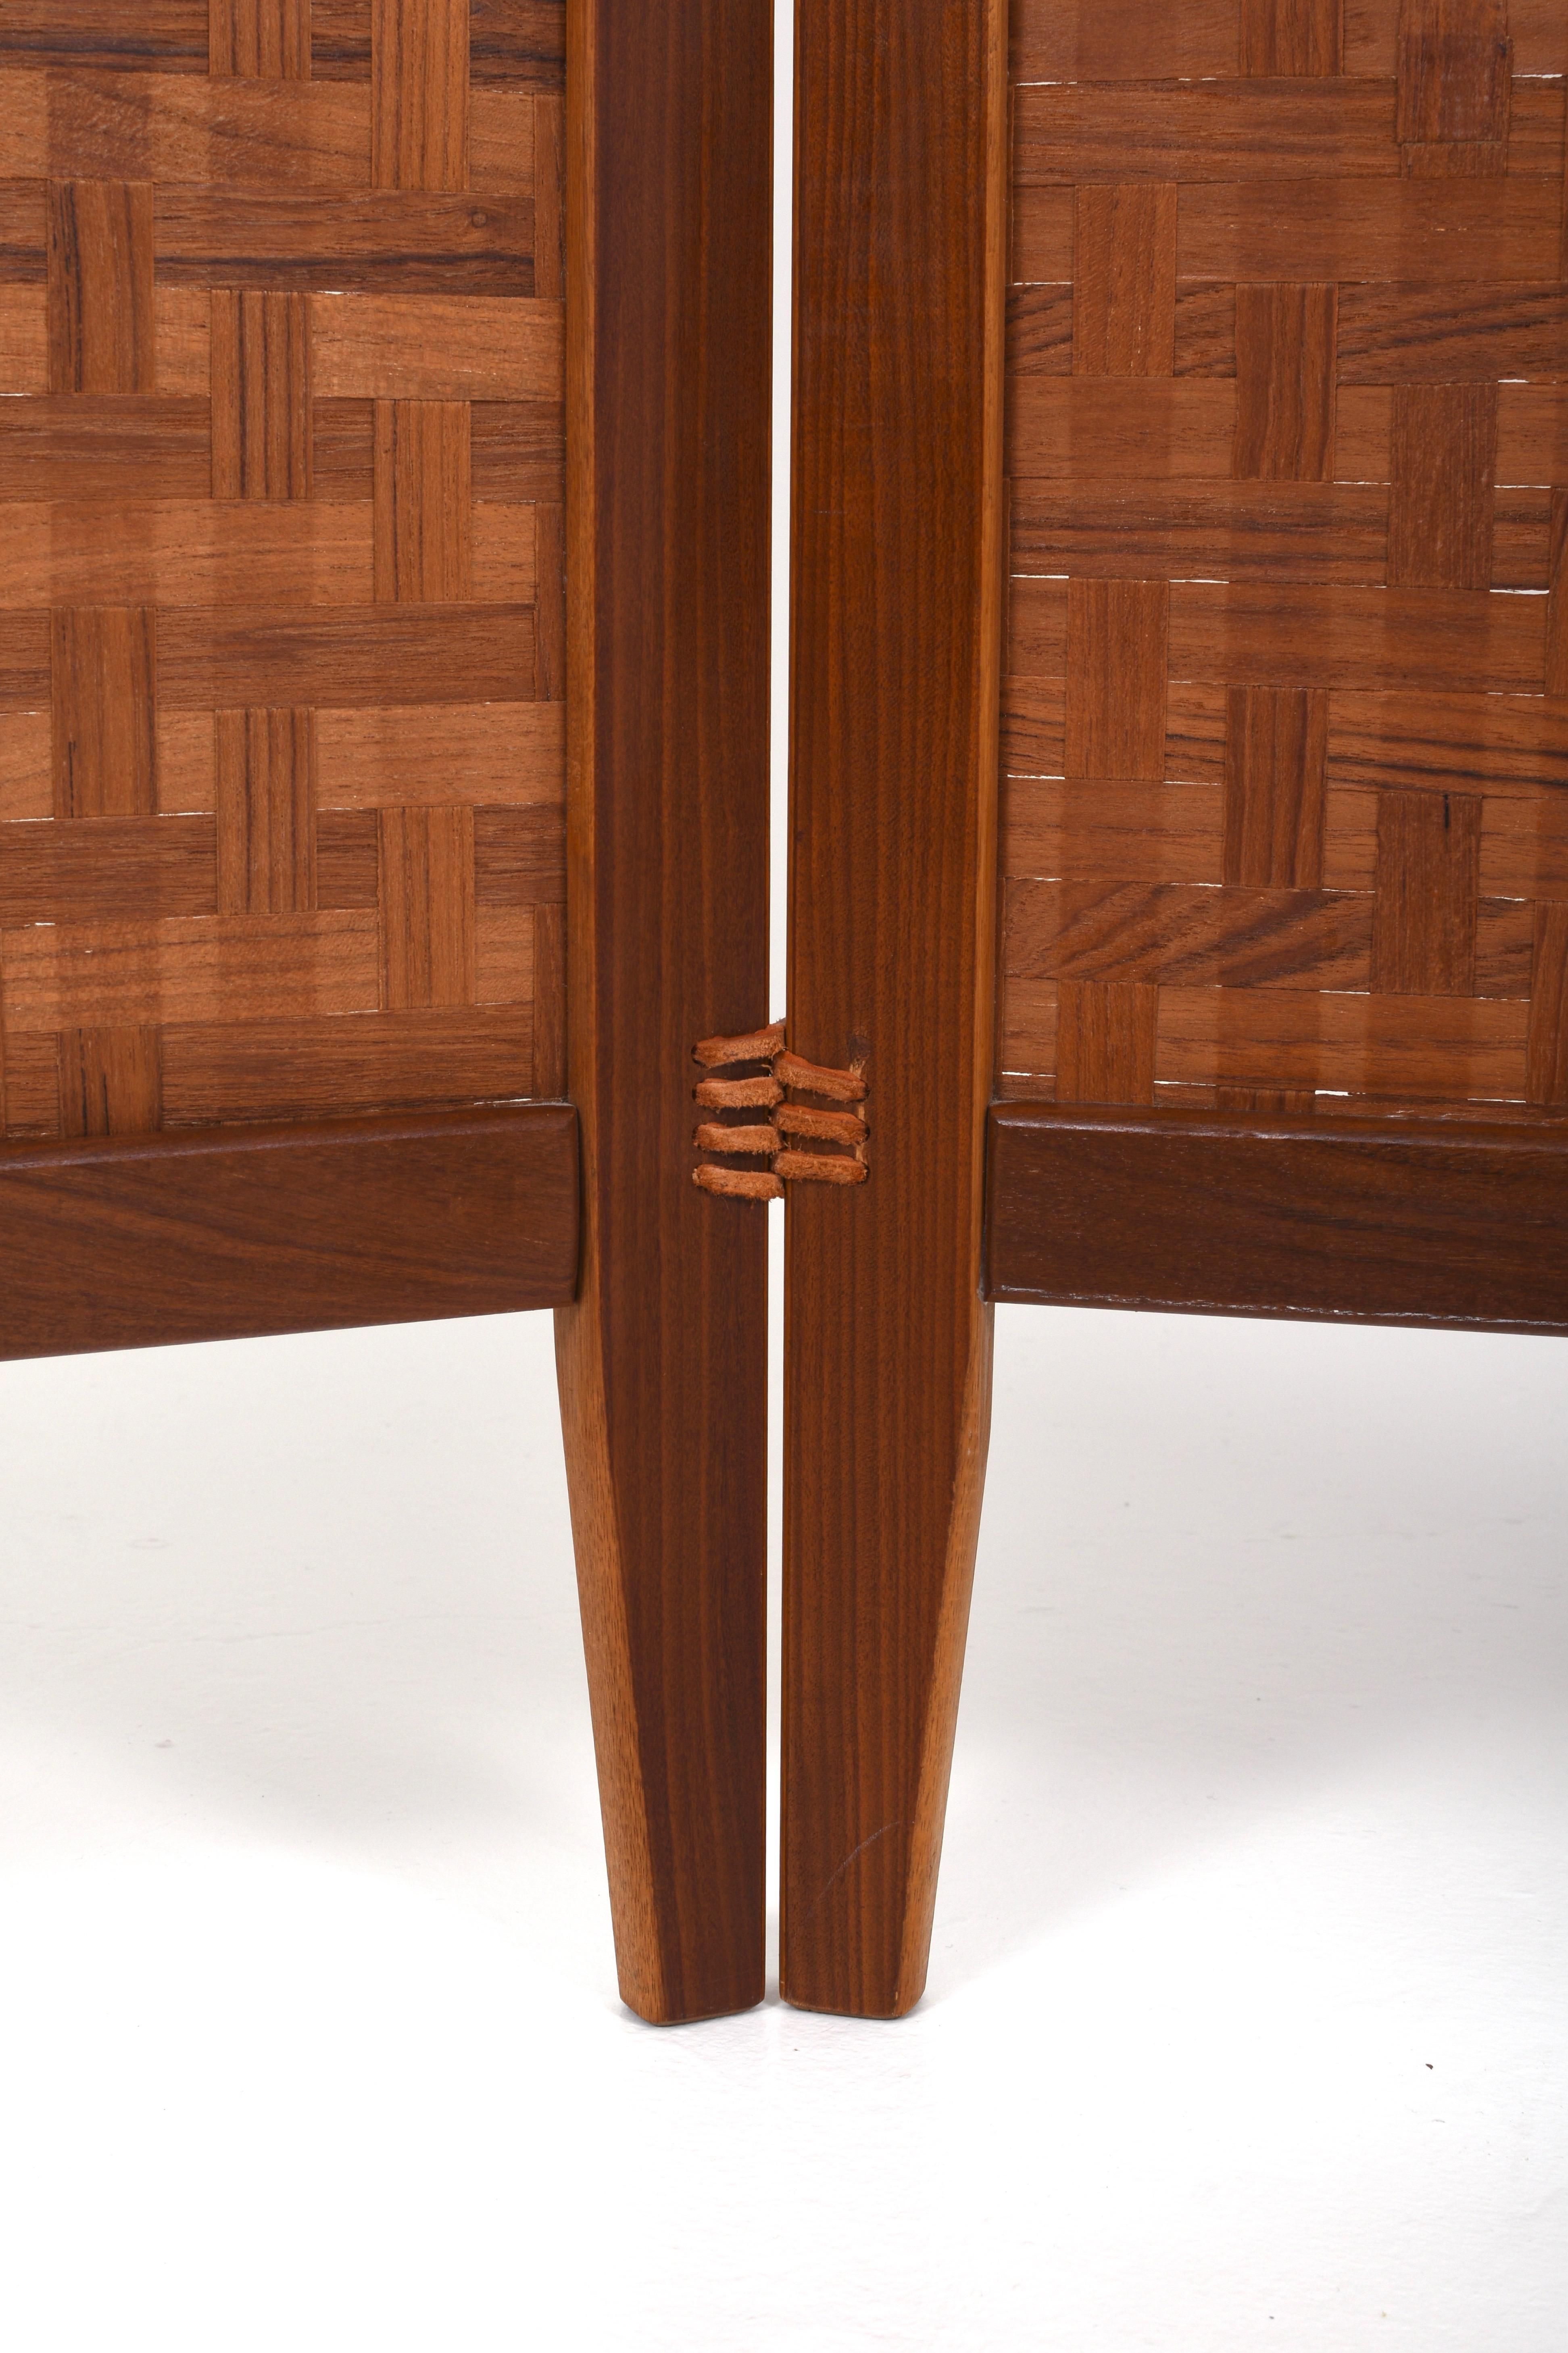 Teak and Leather Room Divider Spåna from Alberts Tibro, 1950s For Sale 1